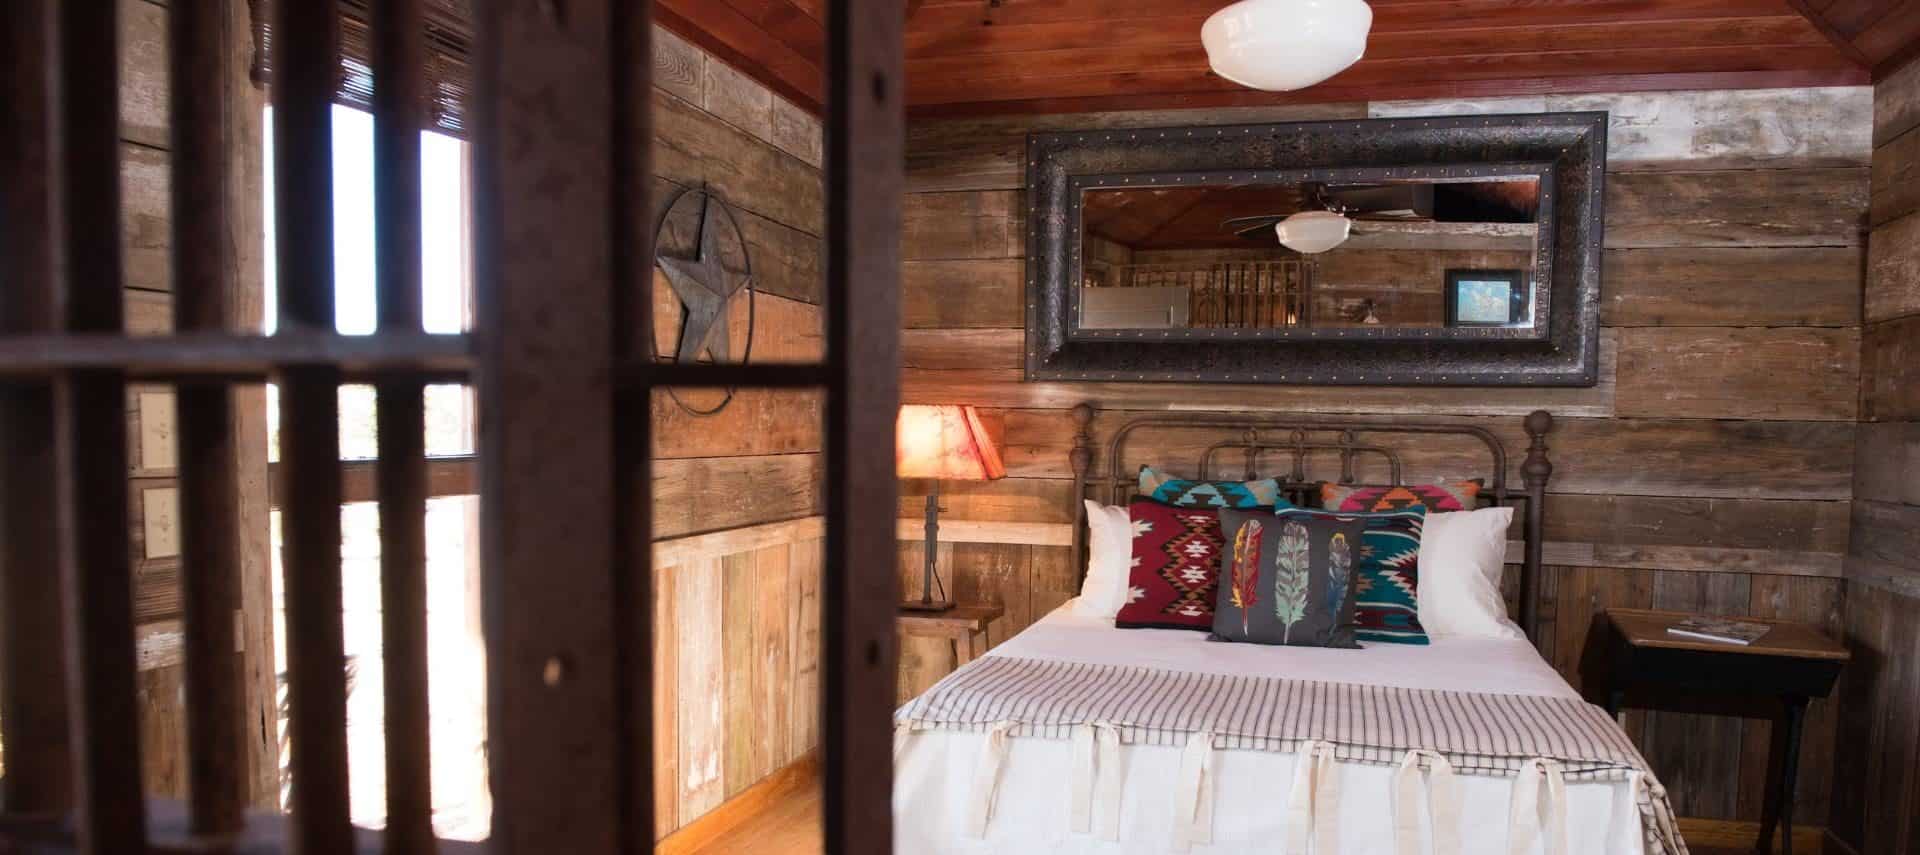 Bedroom that looks like a jail cell with antiqued barn wood paneling on the walls, hardwood flooring, wrought iron bed, and white bedding